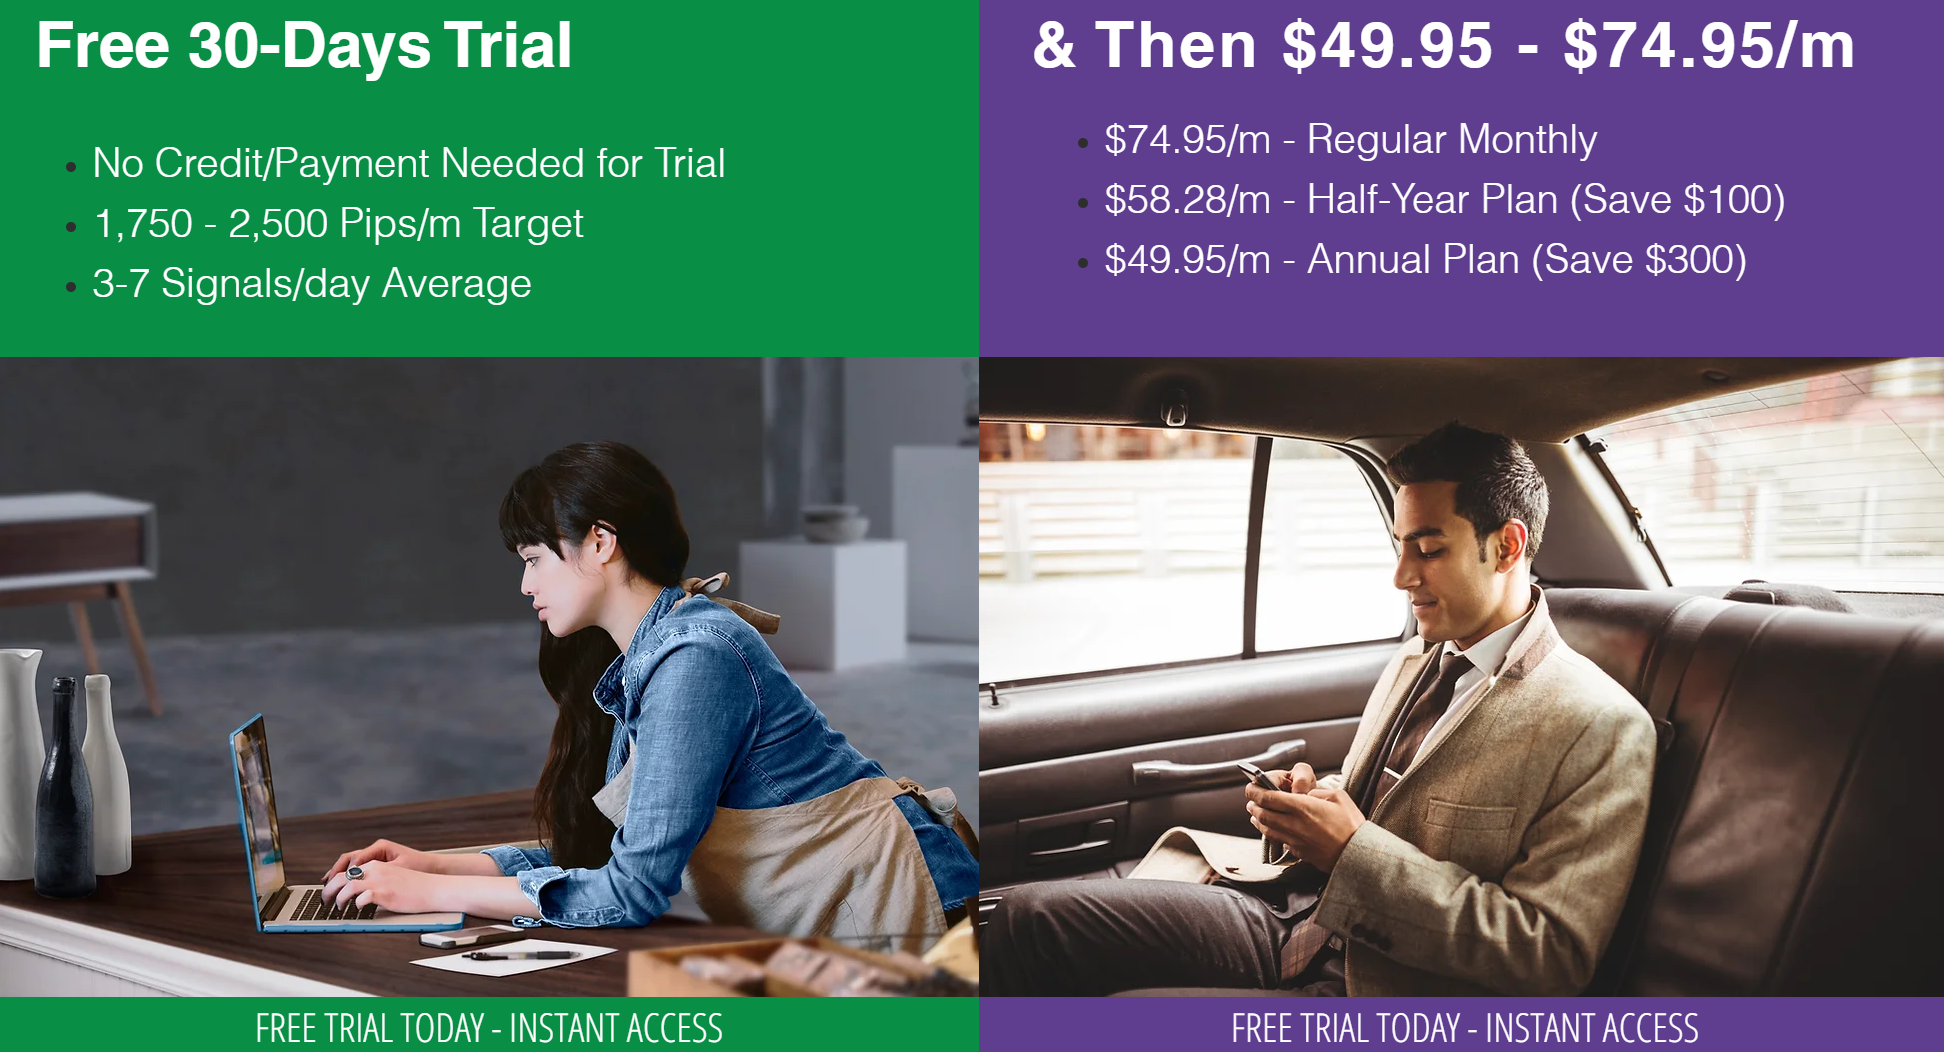 A 30-day Long Free Trial Period